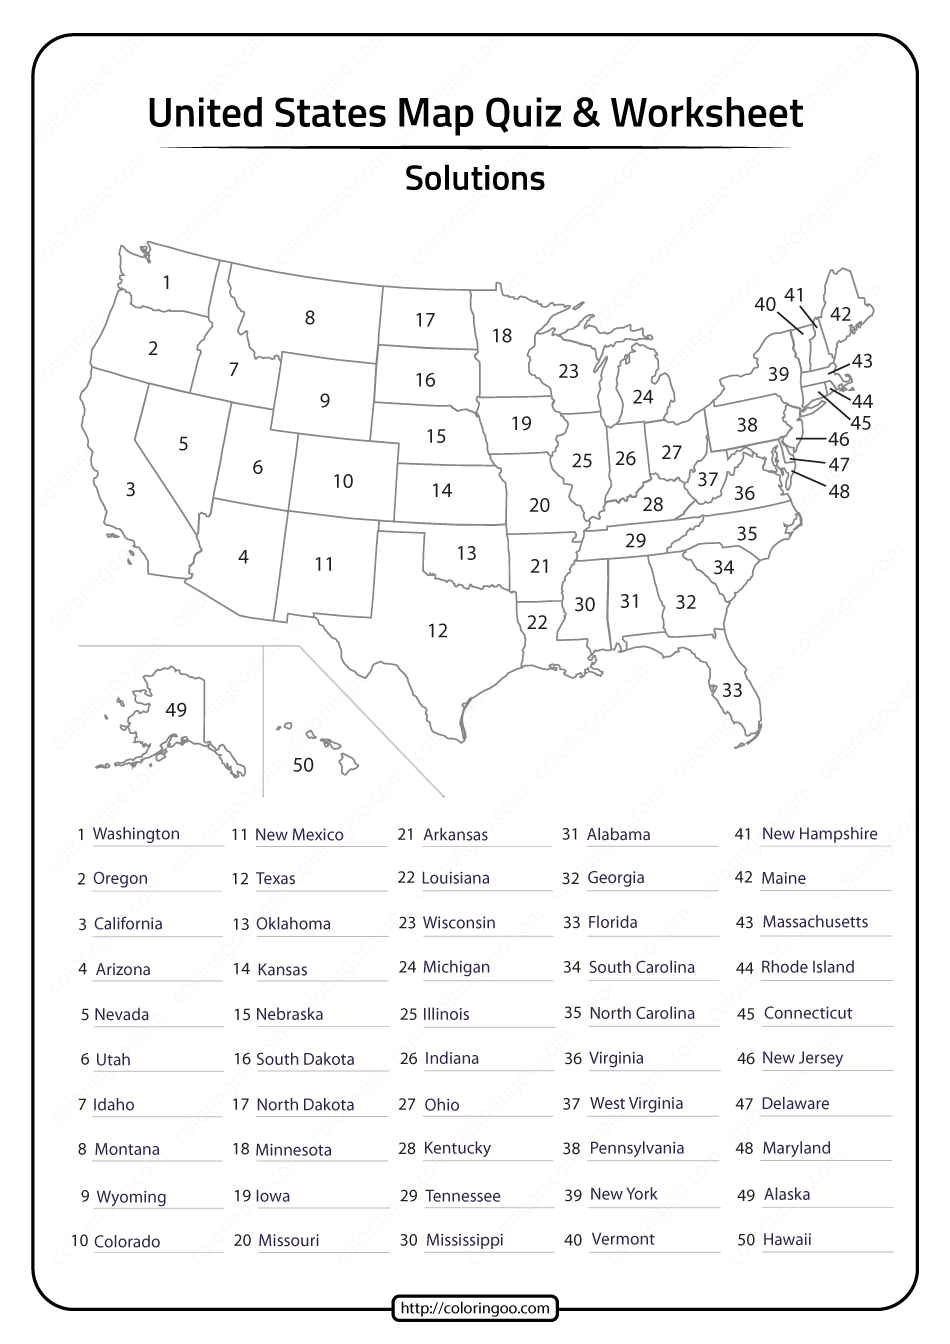 50 States in United States of America Map